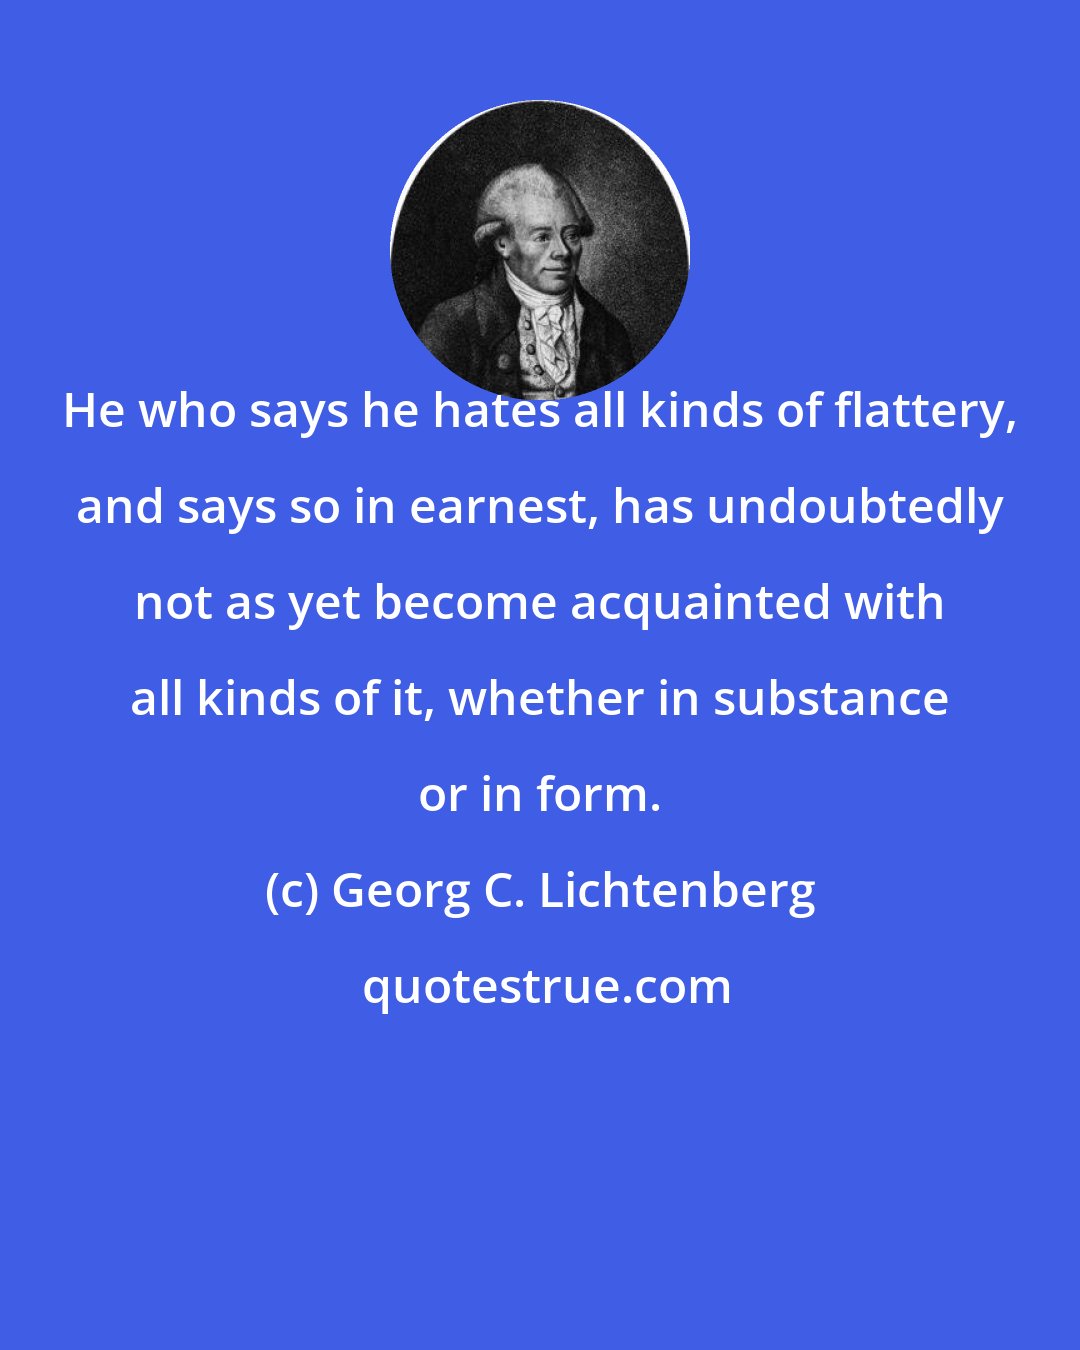 Georg C. Lichtenberg: He who says he hates all kinds of flattery, and says so in earnest, has undoubtedly not as yet become acquainted with all kinds of it, whether in substance or in form.